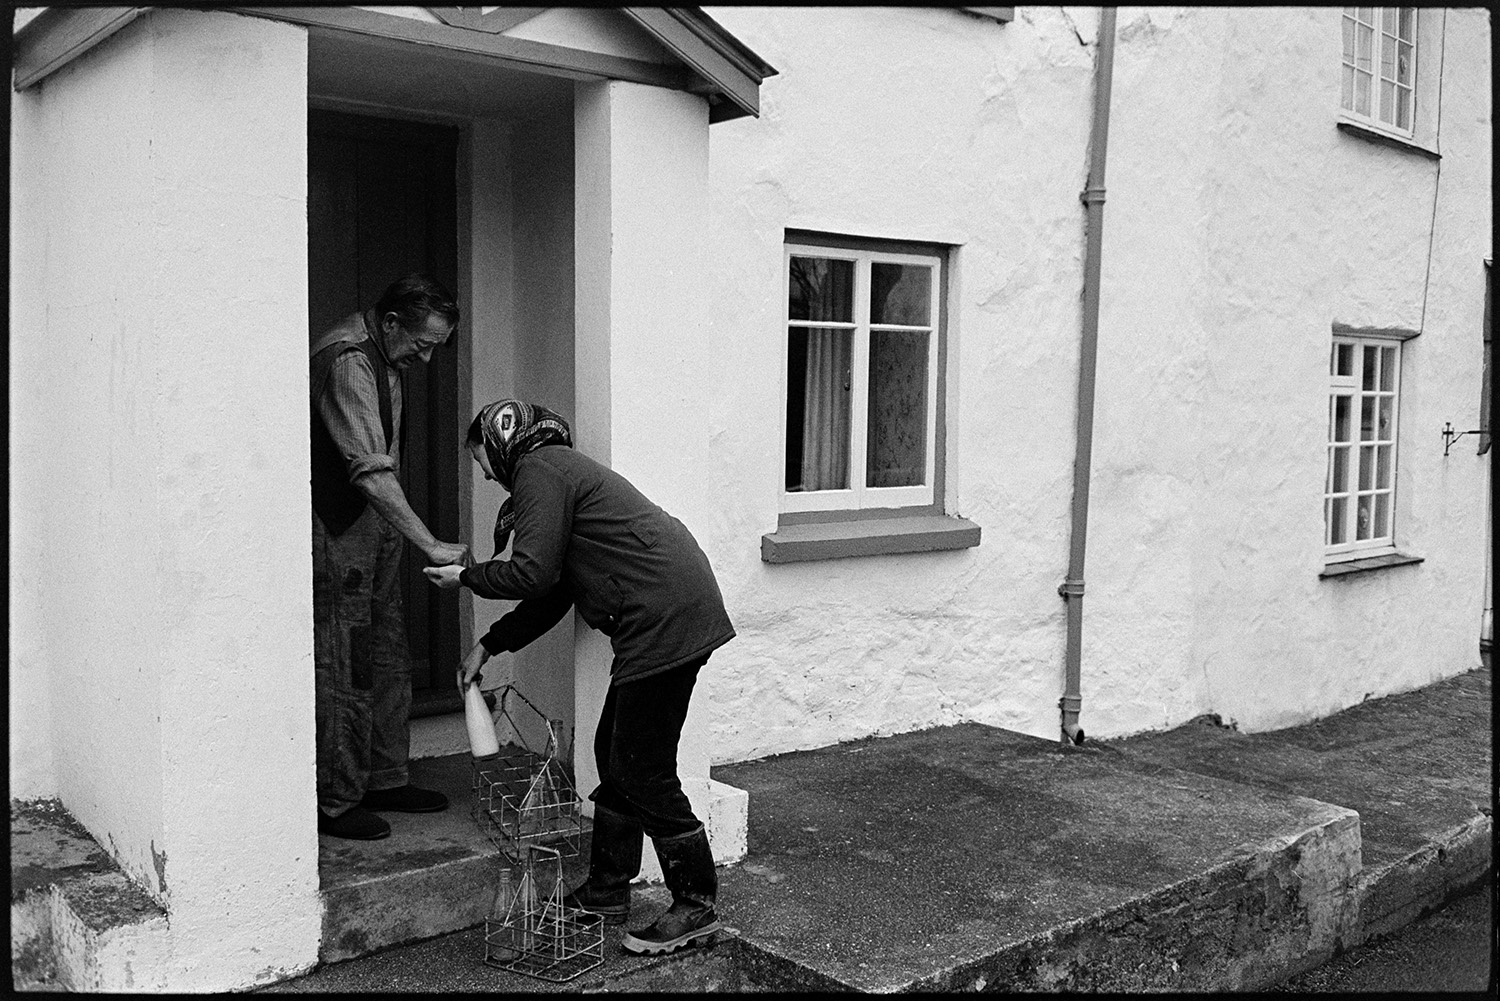 Woman delivering milk round village. <br />
[Jane Woolacott delivering and collecting milk bottles from a man at his house in Atherington. He is paying her for the milk.]